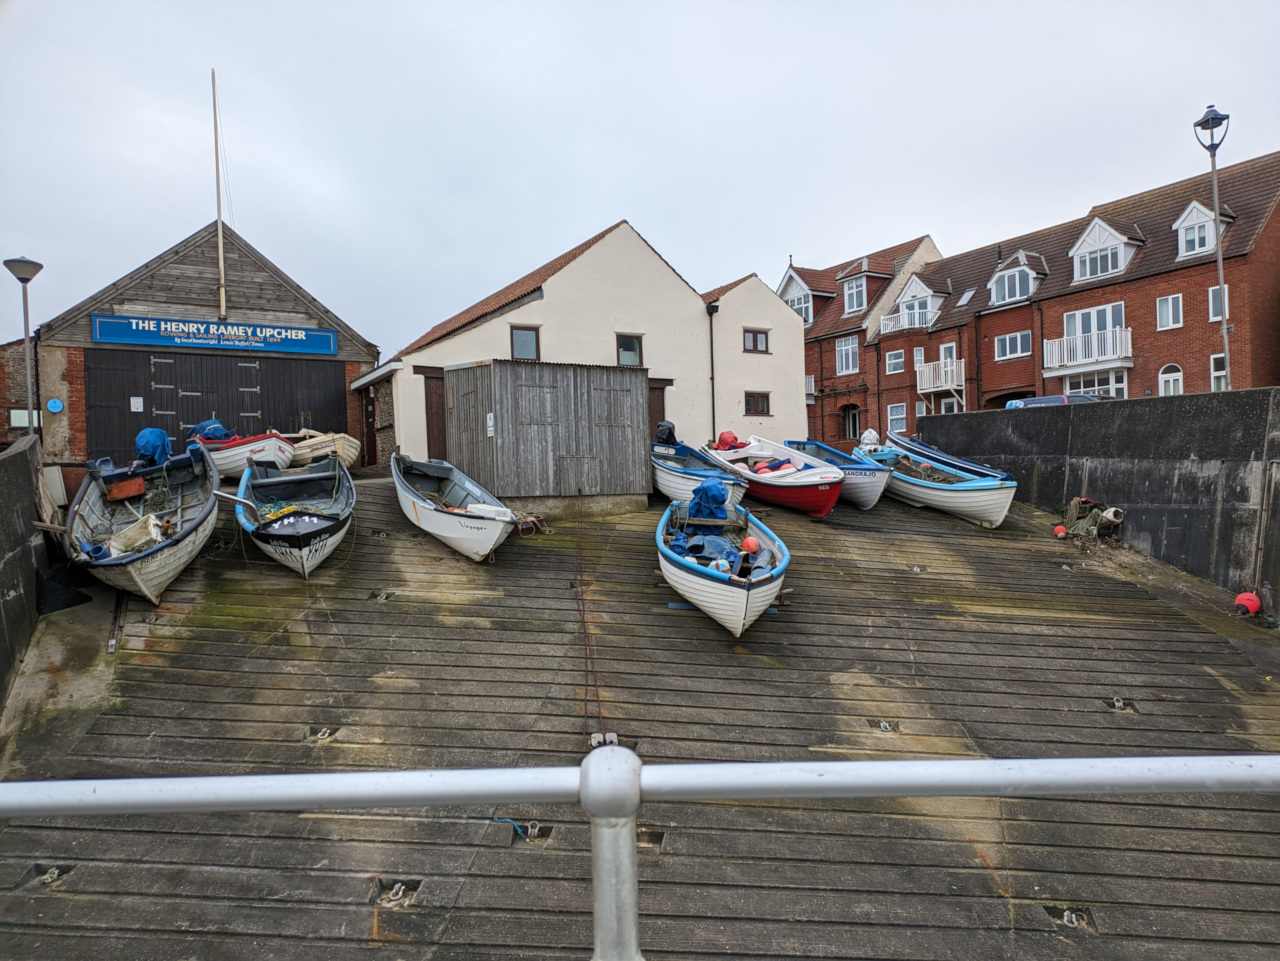 Old boats on launching ramp, in front of buildings.